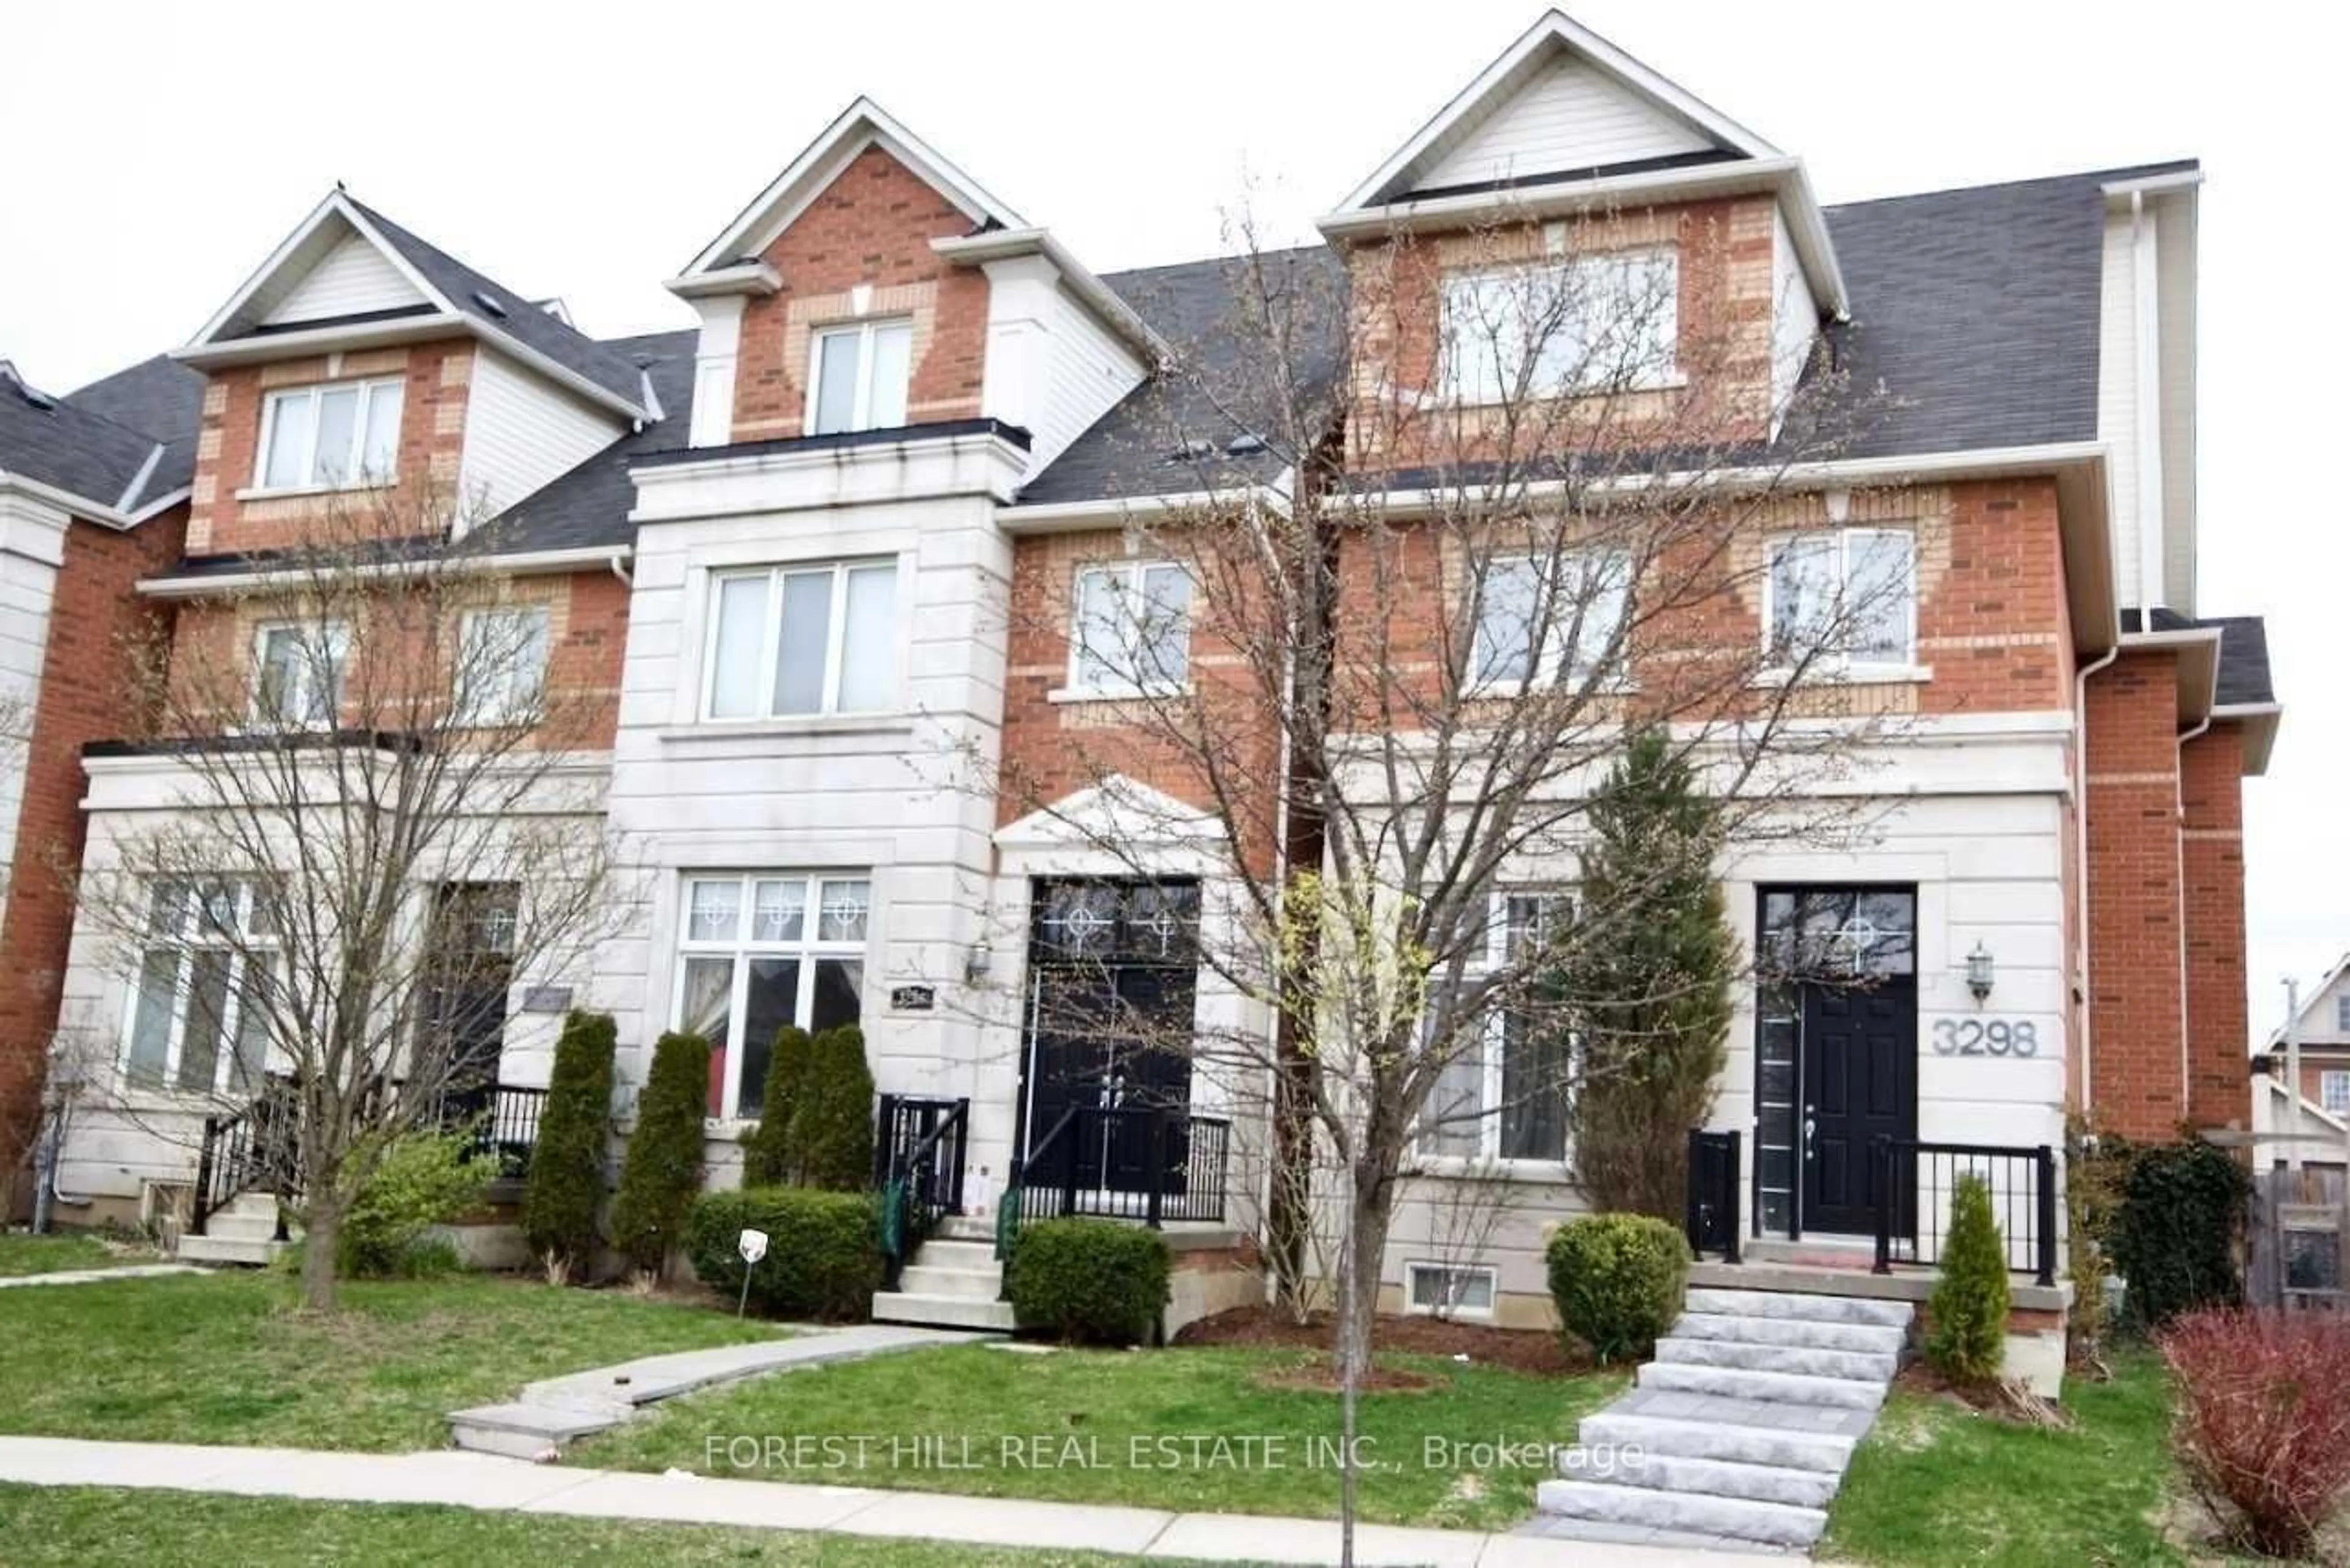 Home with brick exterior material for 3298 Flagstone Dr, Mississauga Ontario L5M 7T7